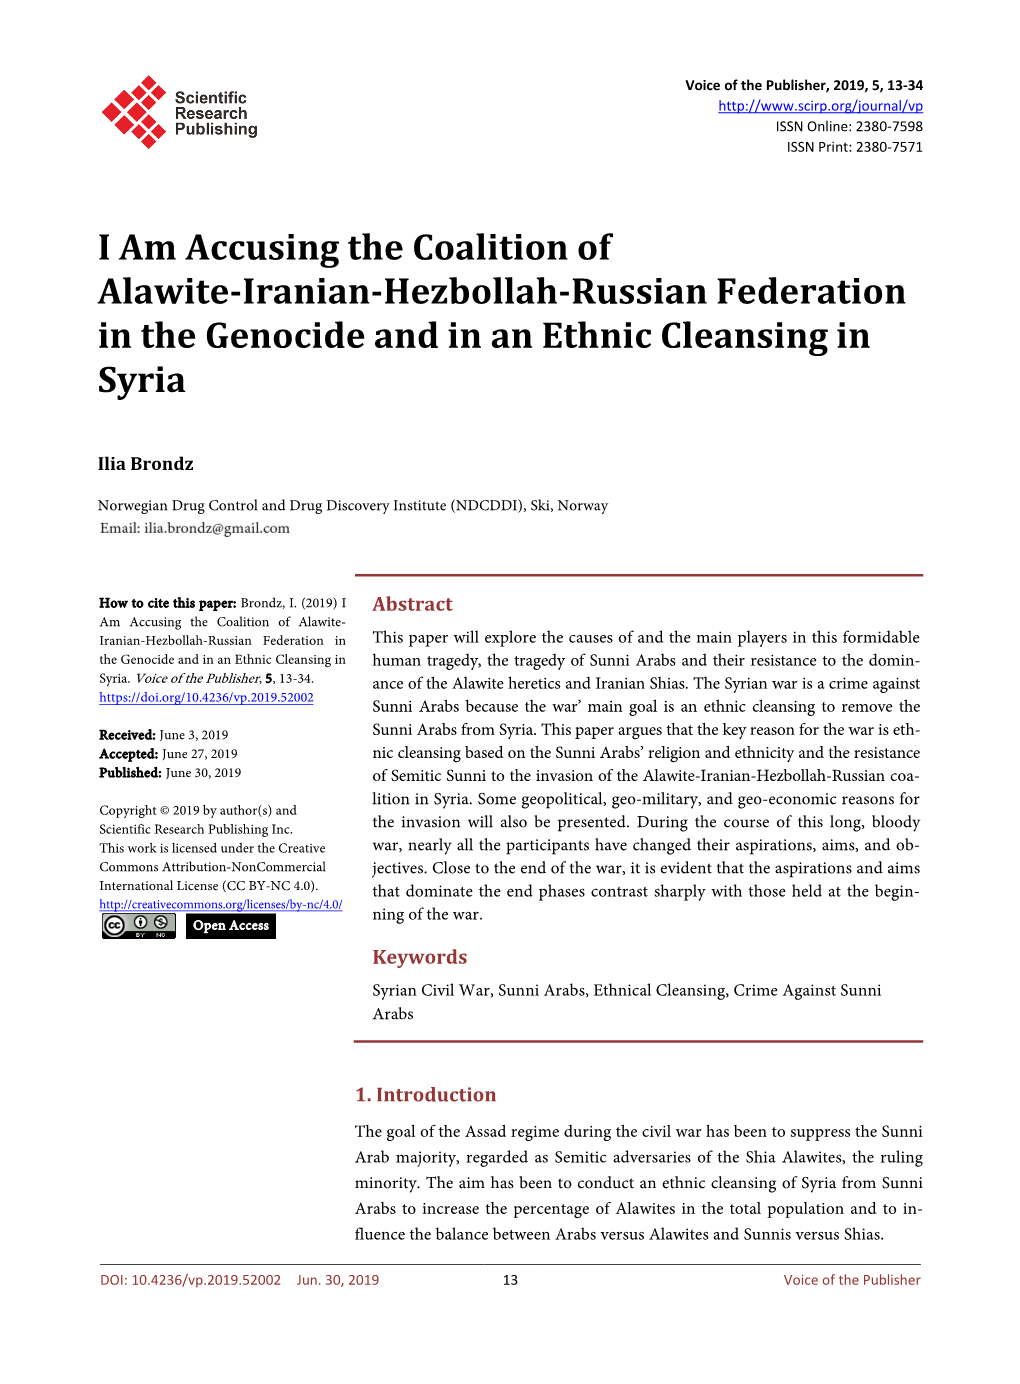 I Am Accusing the Coalition of Alawite-Iranian-Hezbollah-Russian Federation in the Genocide and in an Ethnic Cleansing in Syria